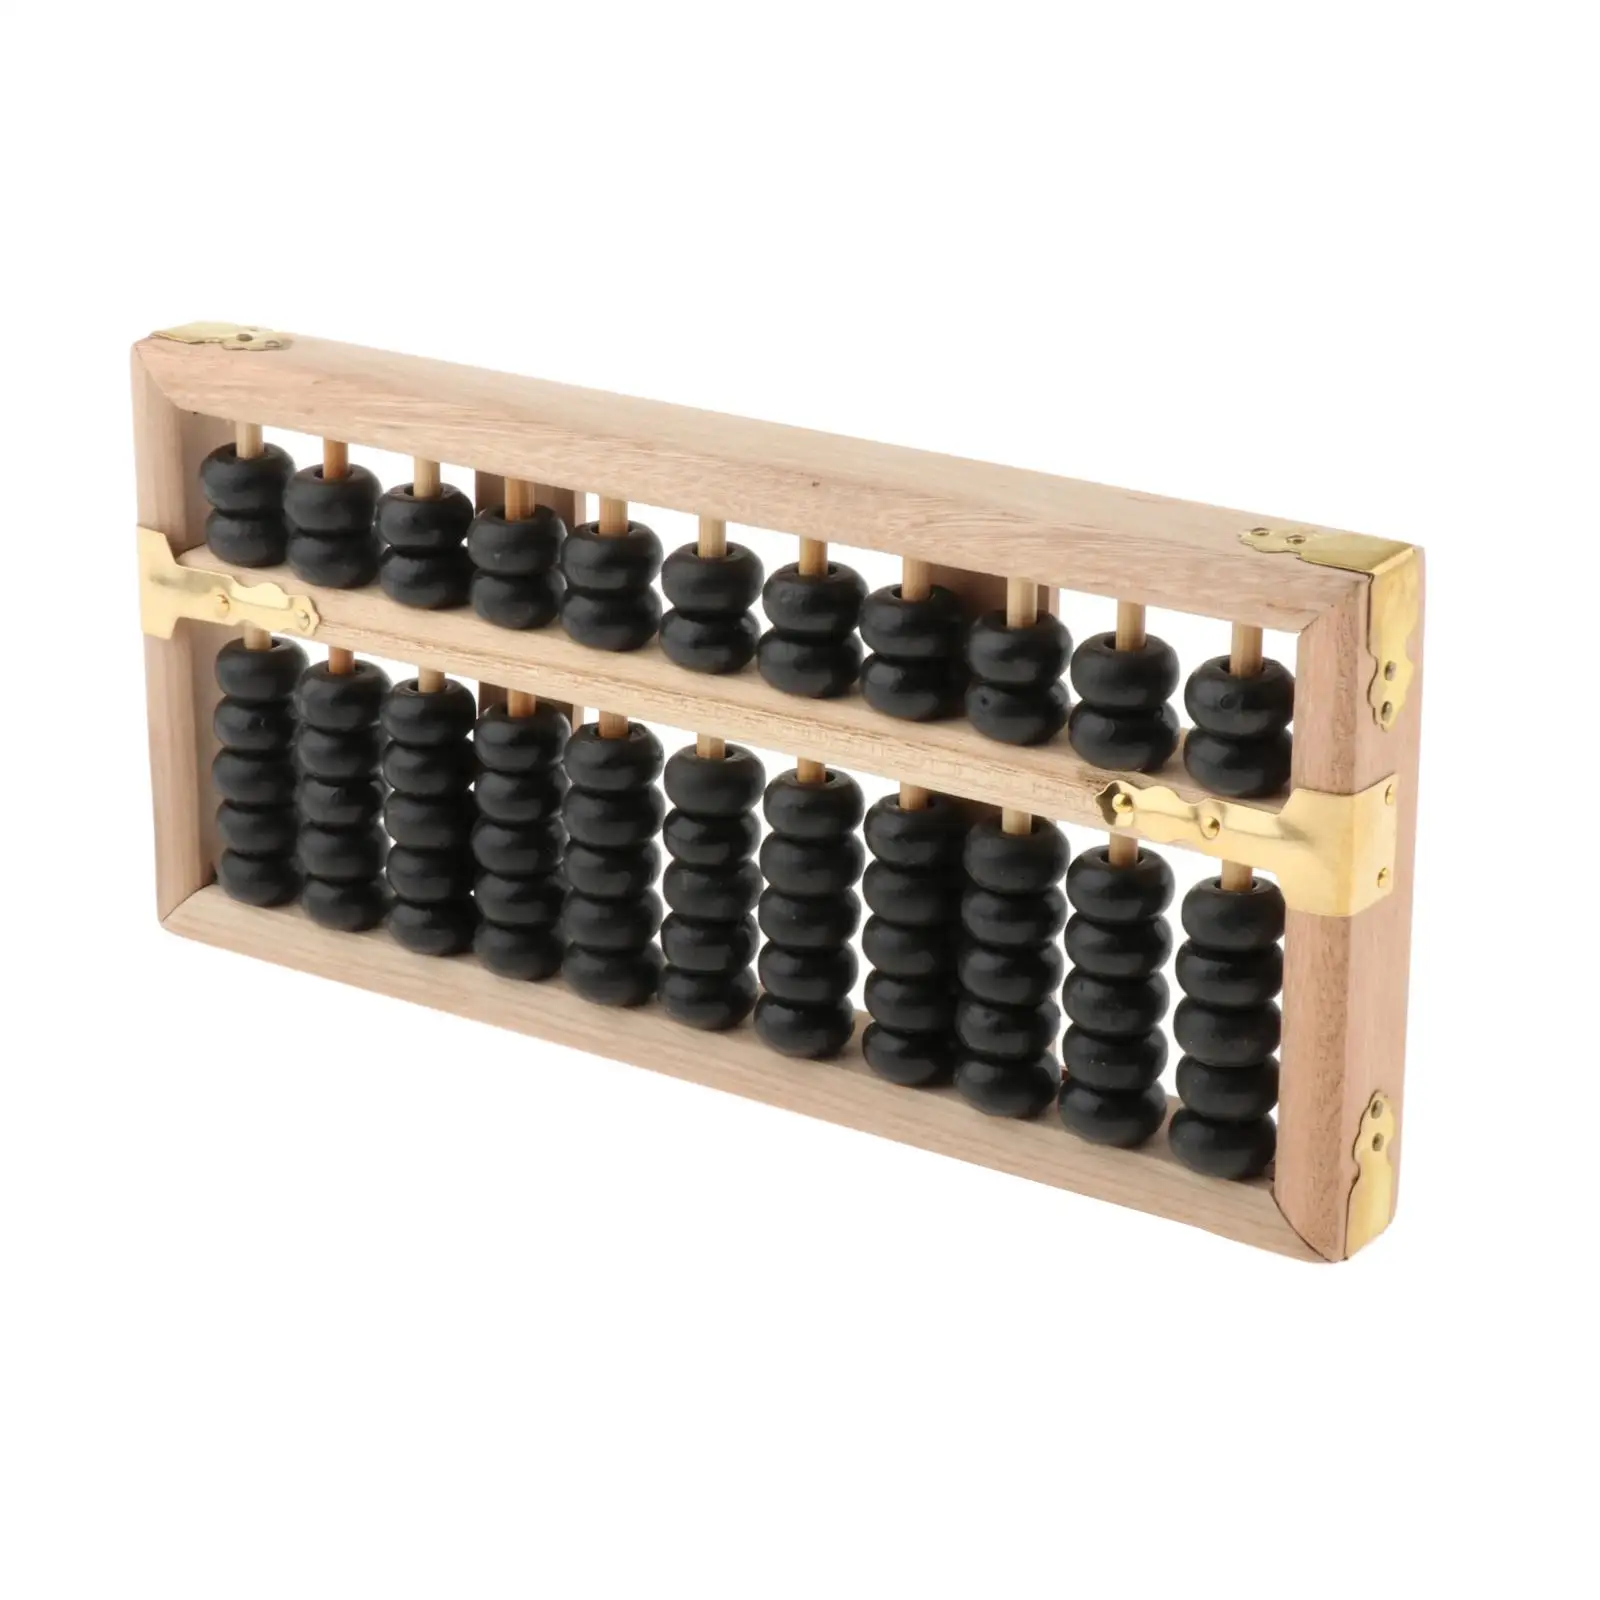 Details about   Leaning Wooden Abacus Calculator 11 Column Math Counting Abacus for School 